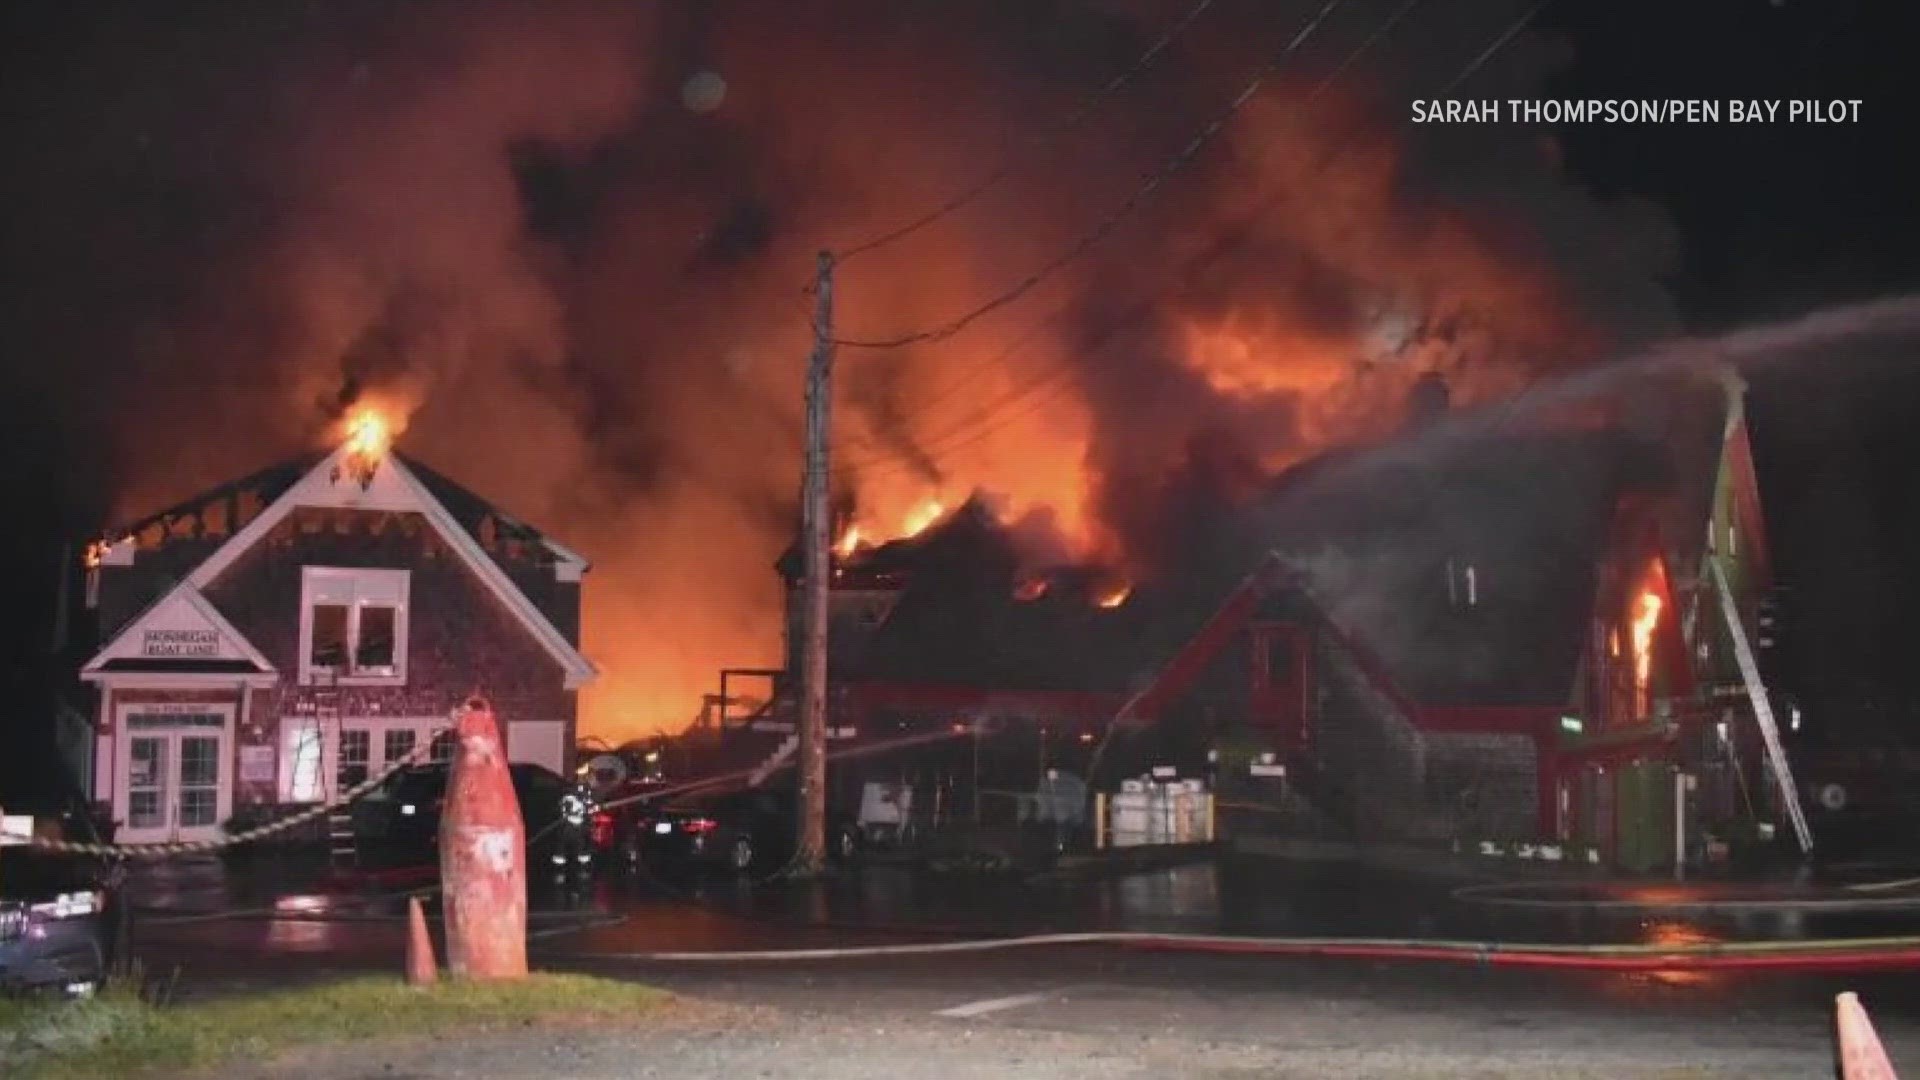 The fire reportedly started at the Dip Net Restaurant and quickly spread to two other businesses, including the Port Clyde General Store, state officials said.